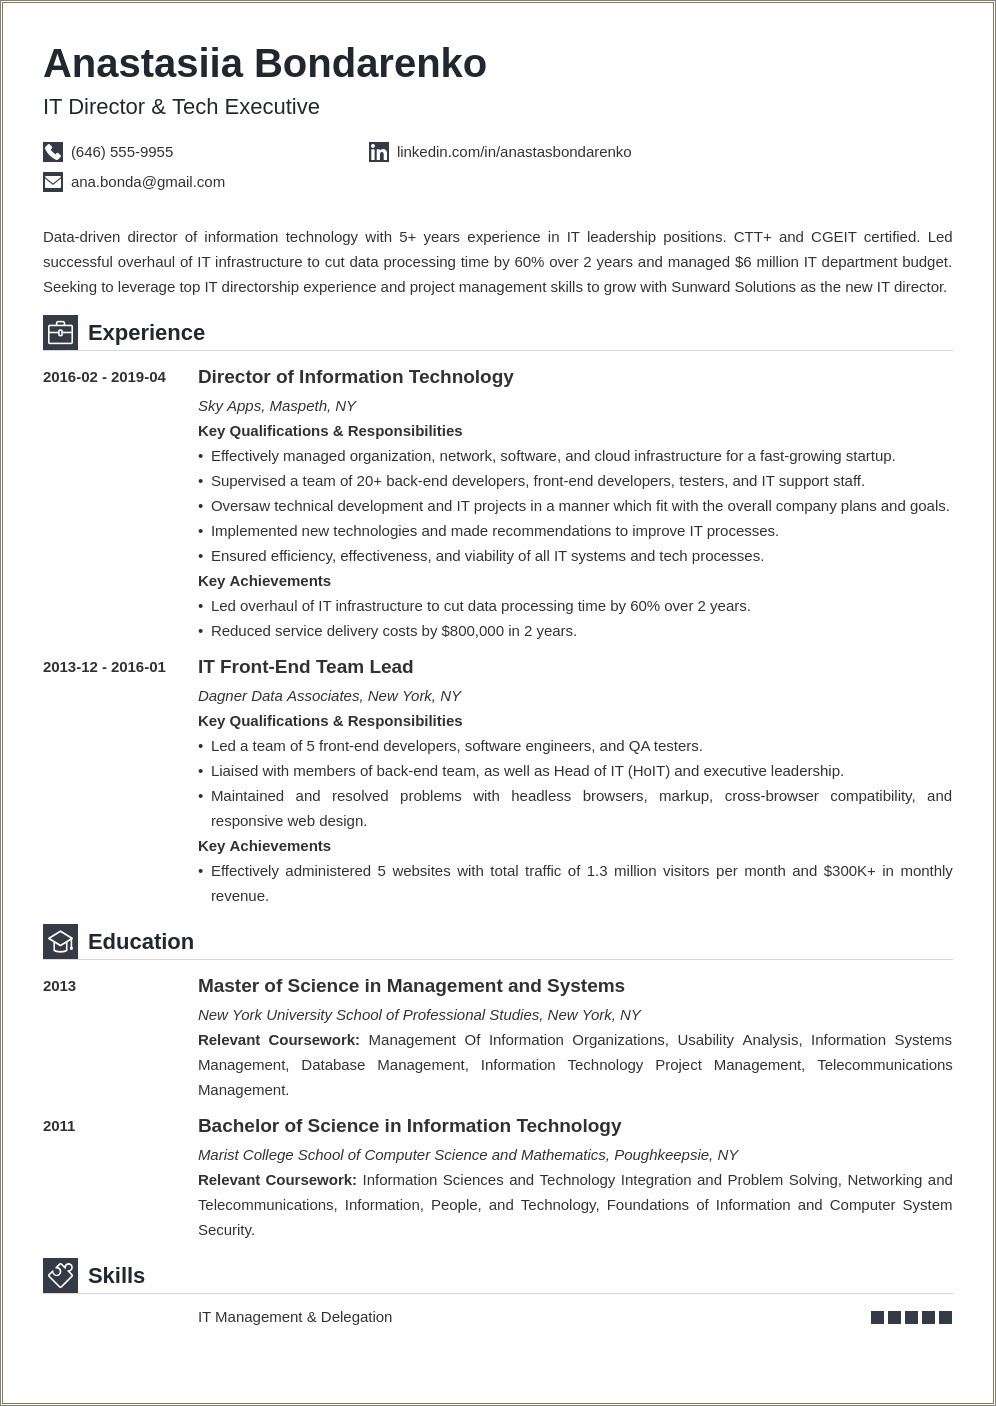 Resume Summary Paragraphs For Engineering Team Lead Andmanager